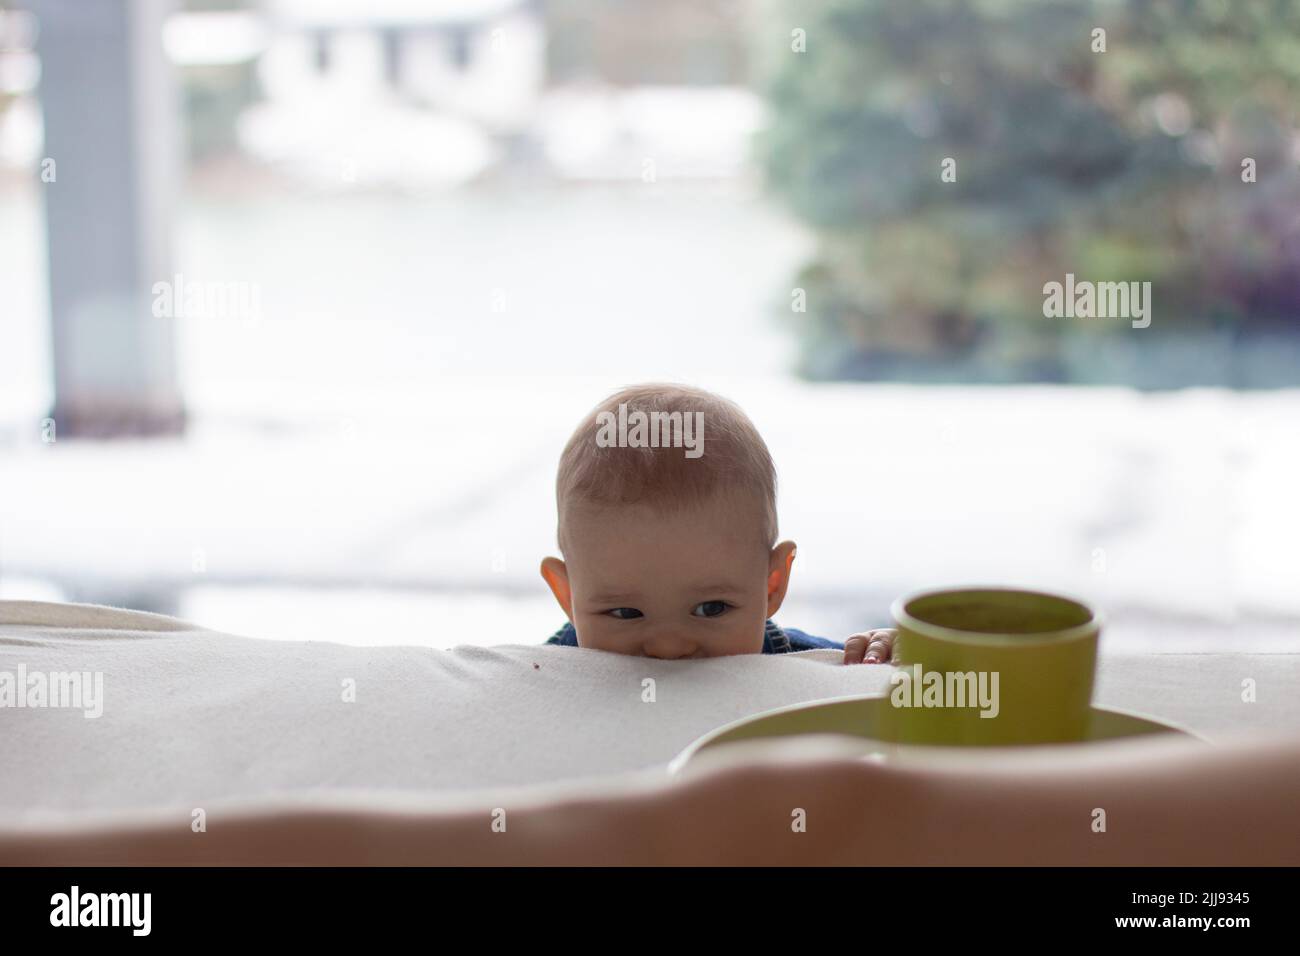 Cute toddler biting edge of parents bed, teething and exploring curiously focused on cup of coffee Stock Photo